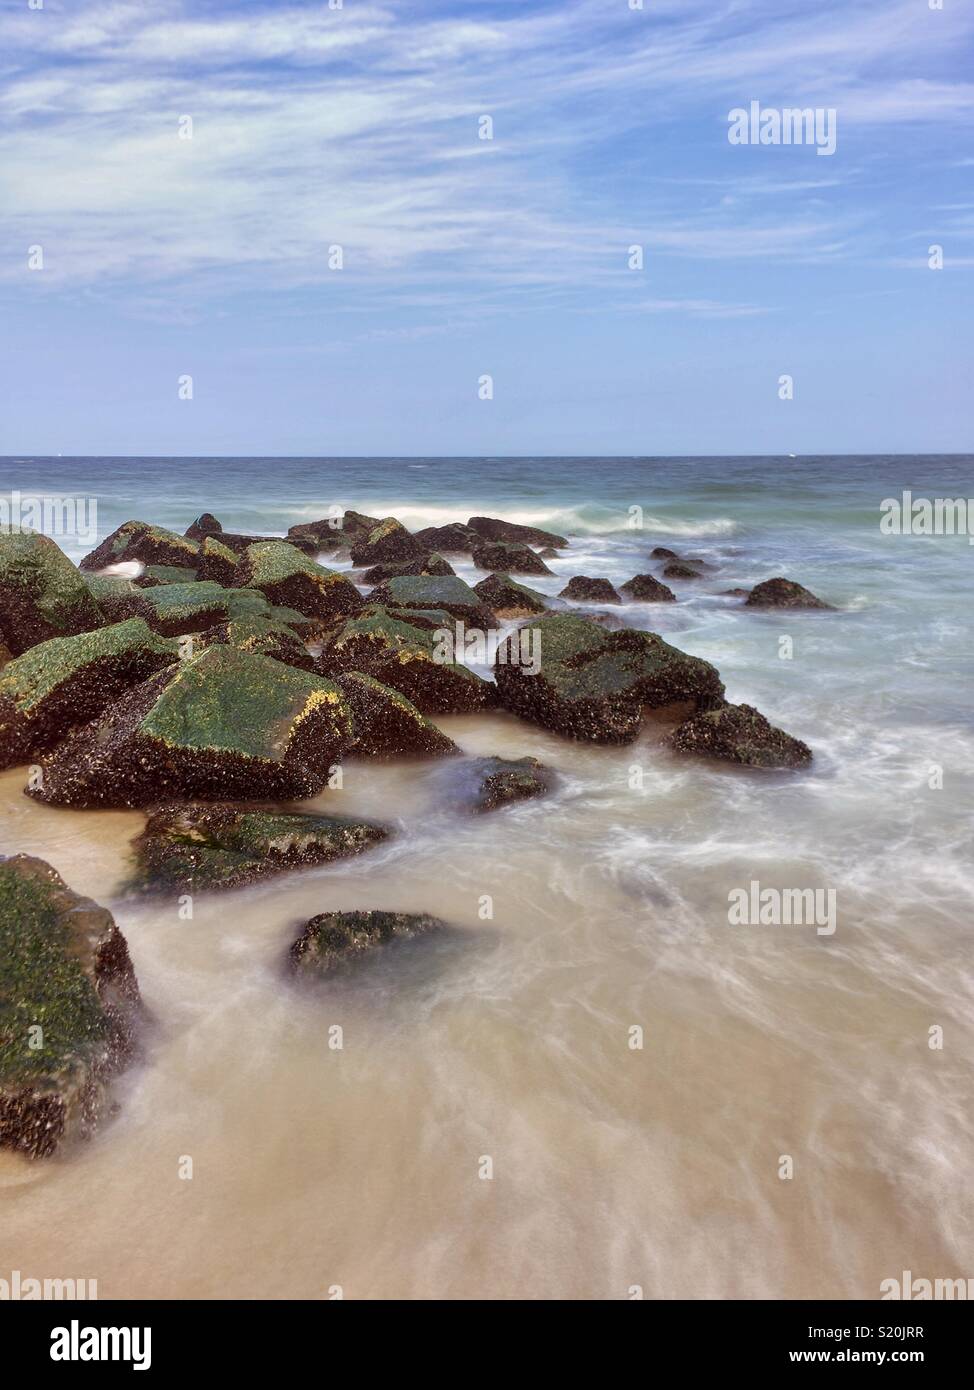 Moss-covered rocks at a beach down the Jersey Shore Stock Photo